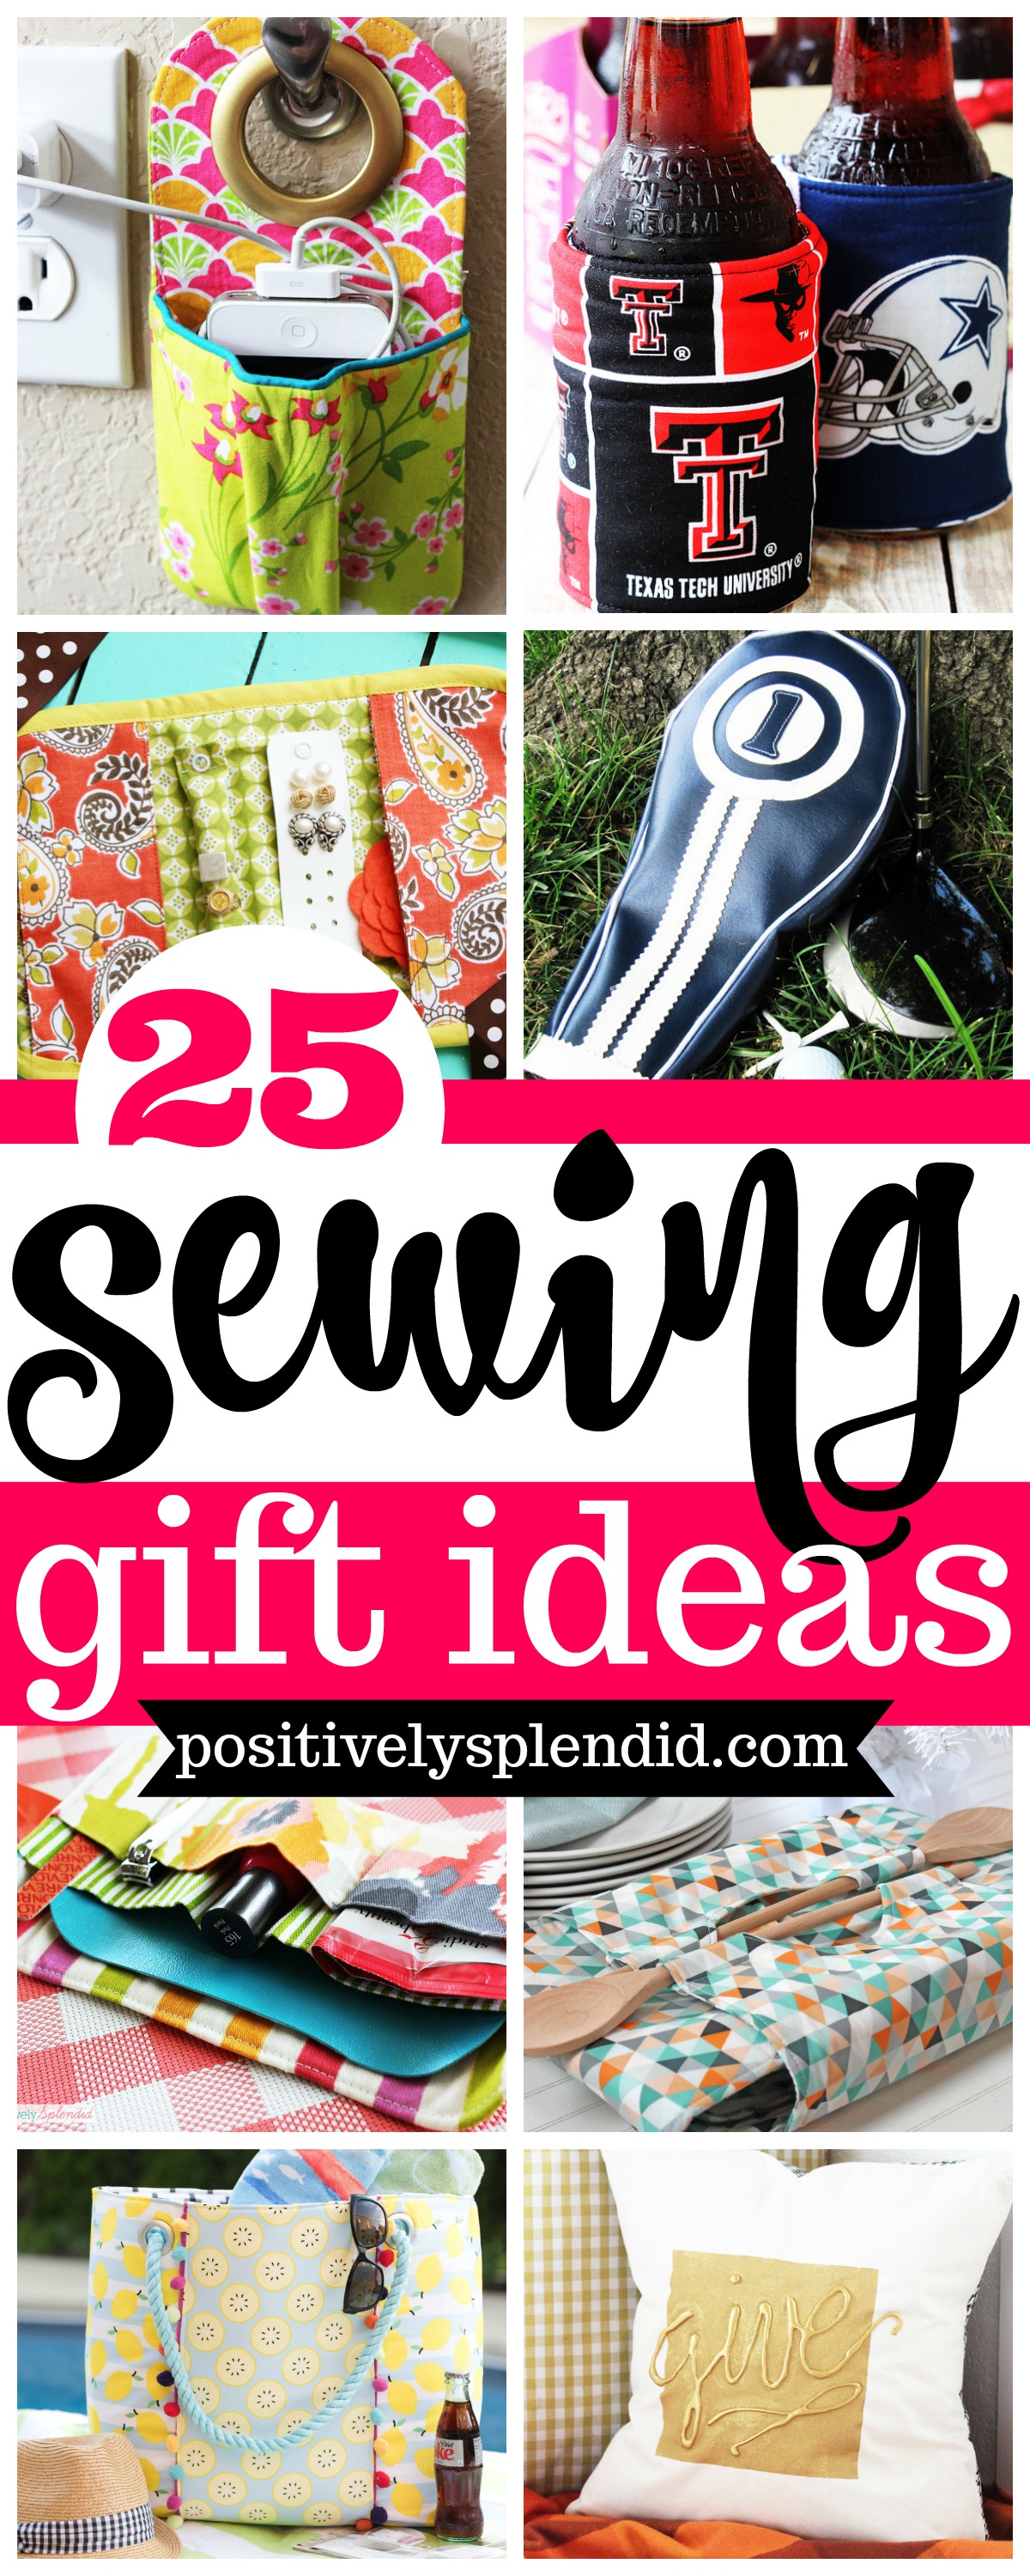 32+ Gifts to Sew for Teens: Sewing Projects to Make Teen Gifts